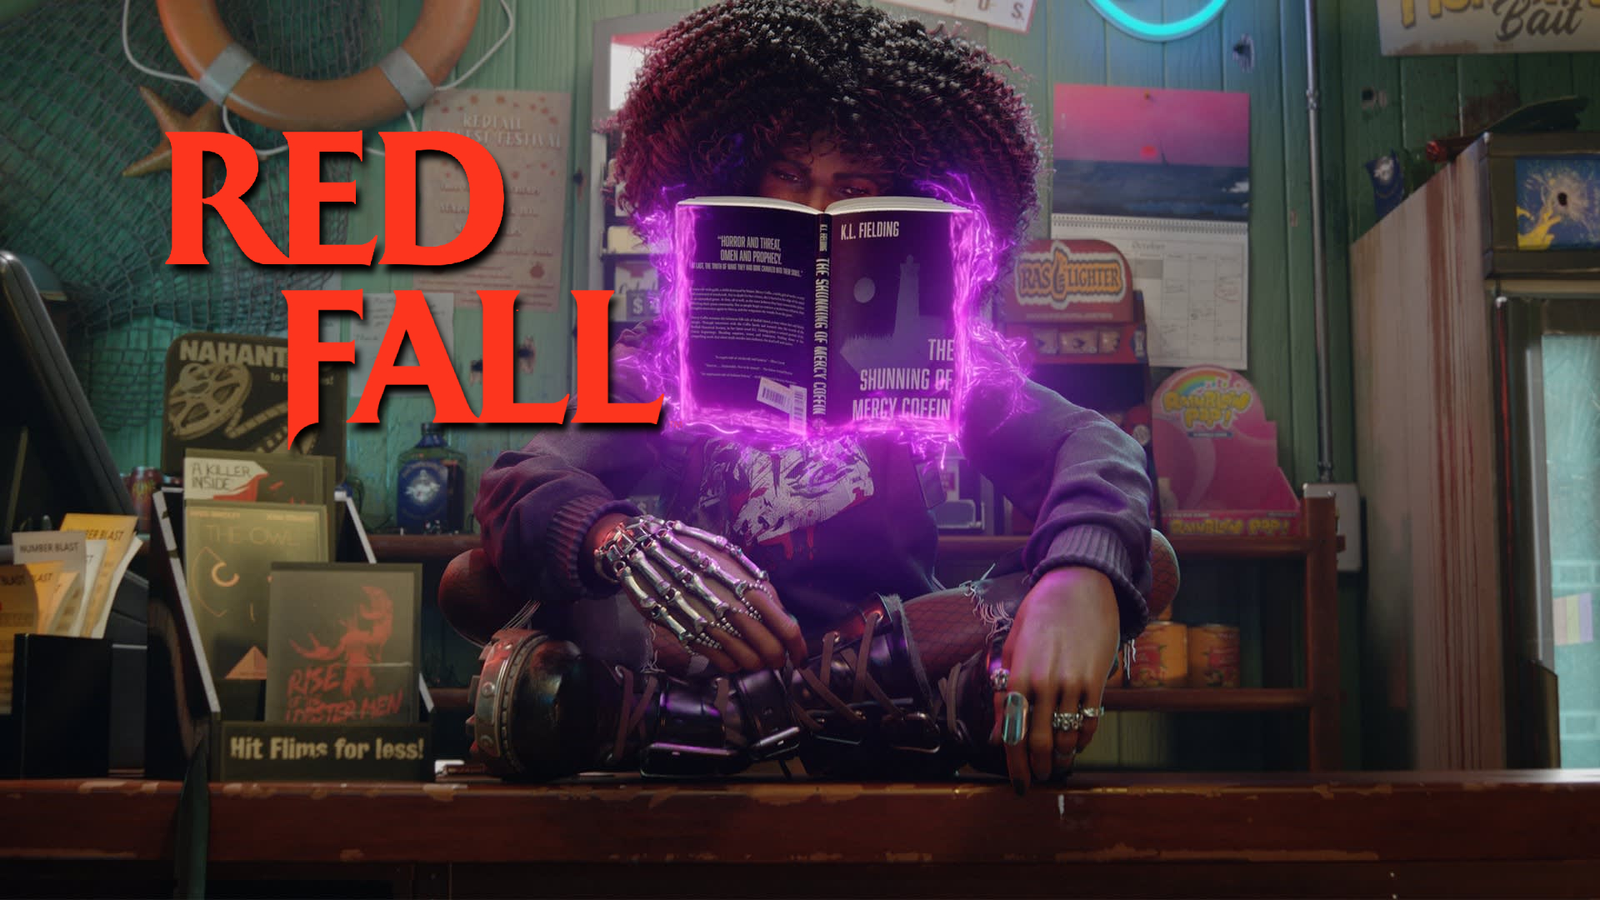 Redfall will reportedly be Arkane's take on Far Cry, focusing on open-world  and story-centric gameplay